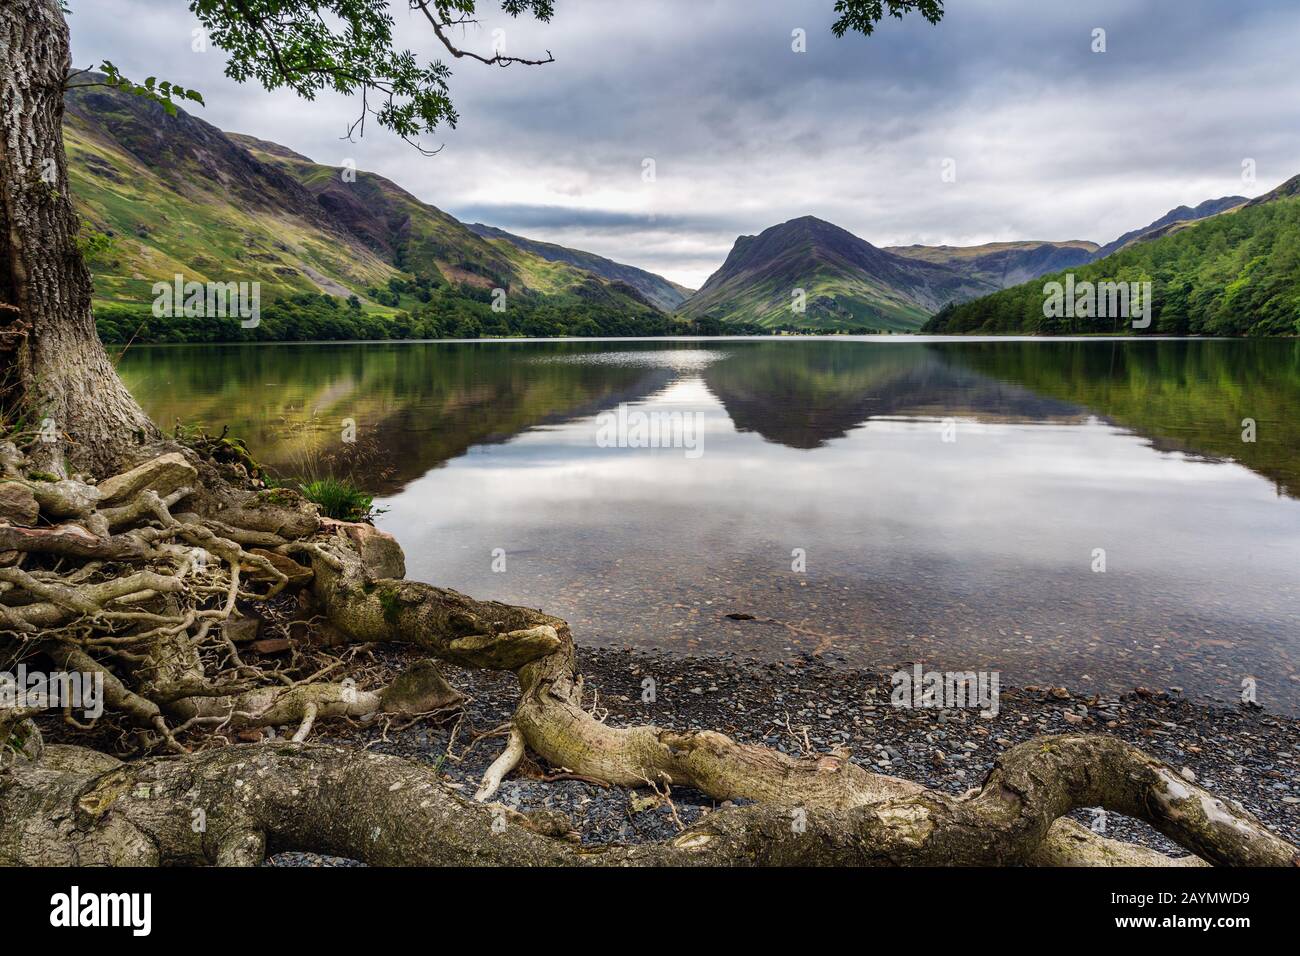 A tree with roots showing on the shores of Buttermere Lake, with Fleetwith Pike in the distance, Lake District National Park, Cumbria, England, UK Stock Photo